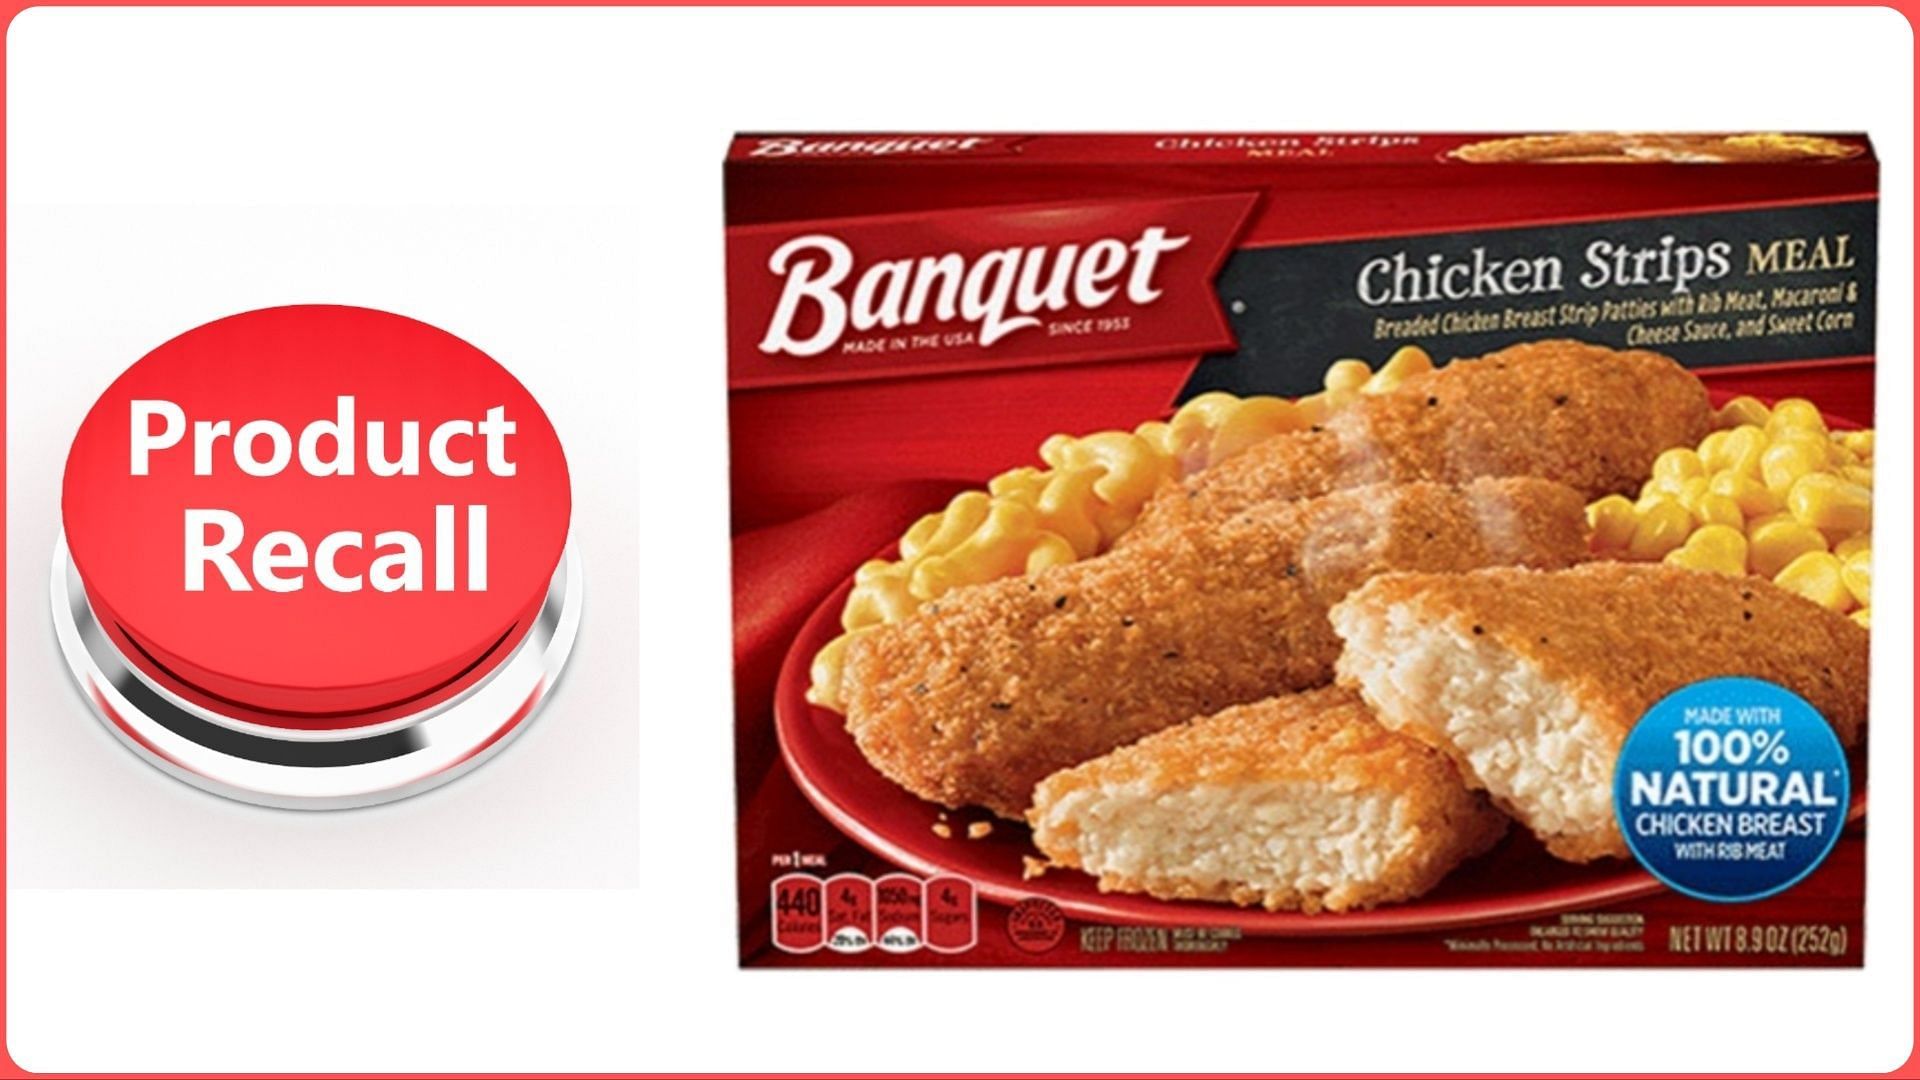 Banquet Chicken Strips meals recall: Reason, affected lot numbers, and ...